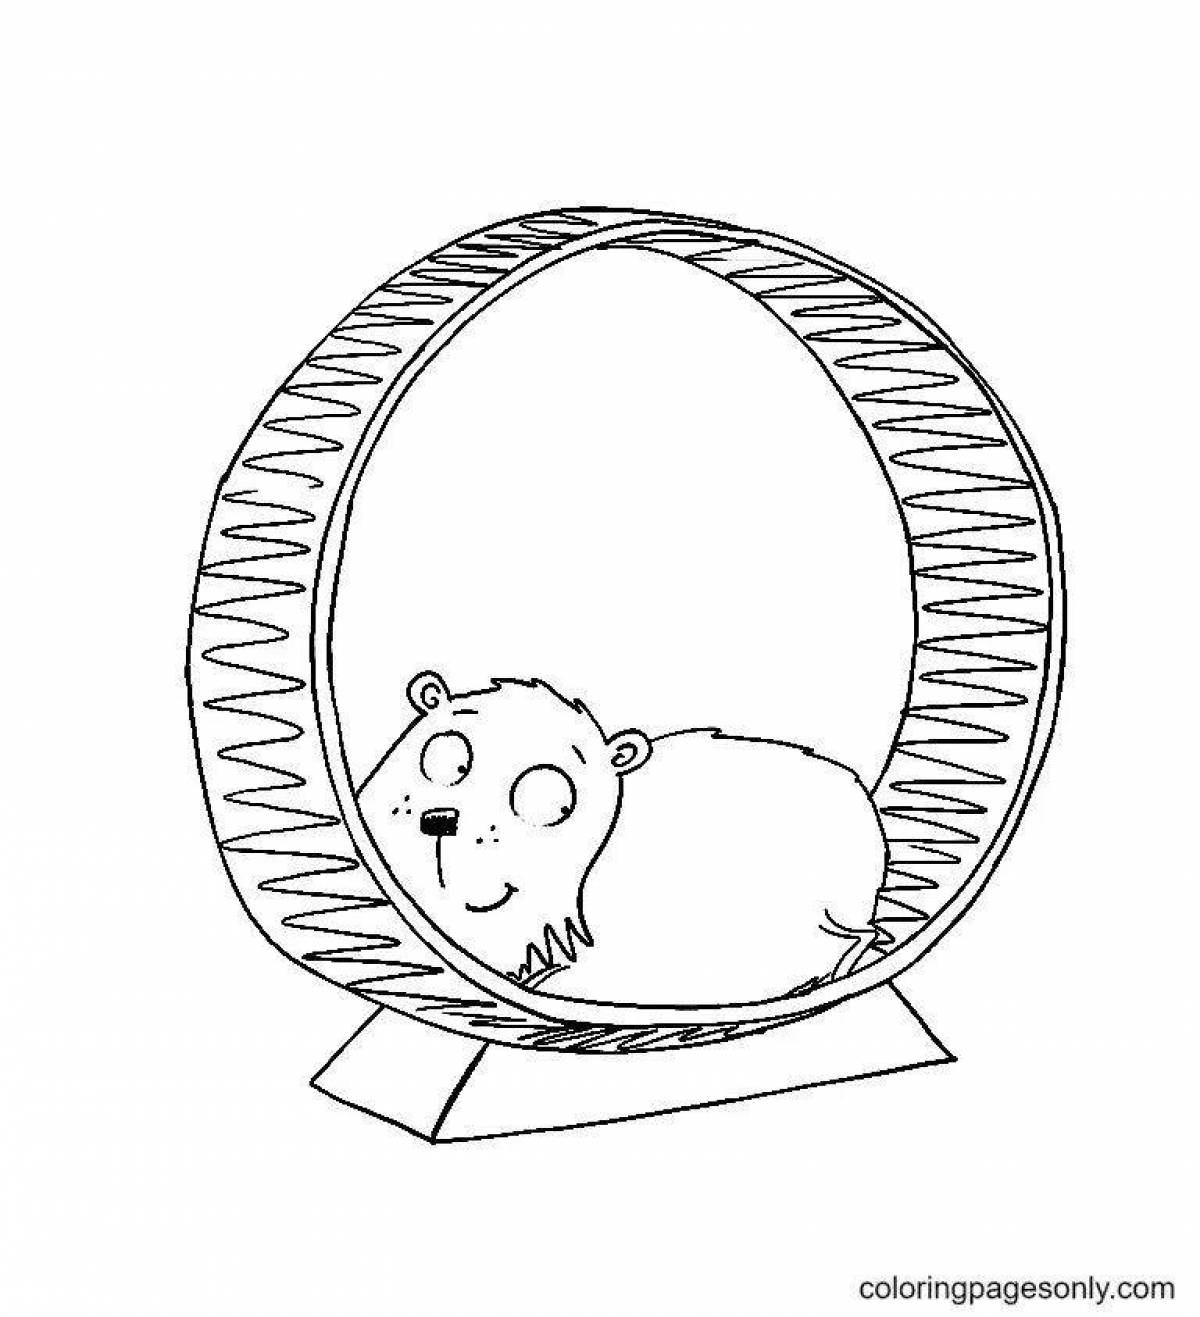 Fairy coloring pages for hamsters